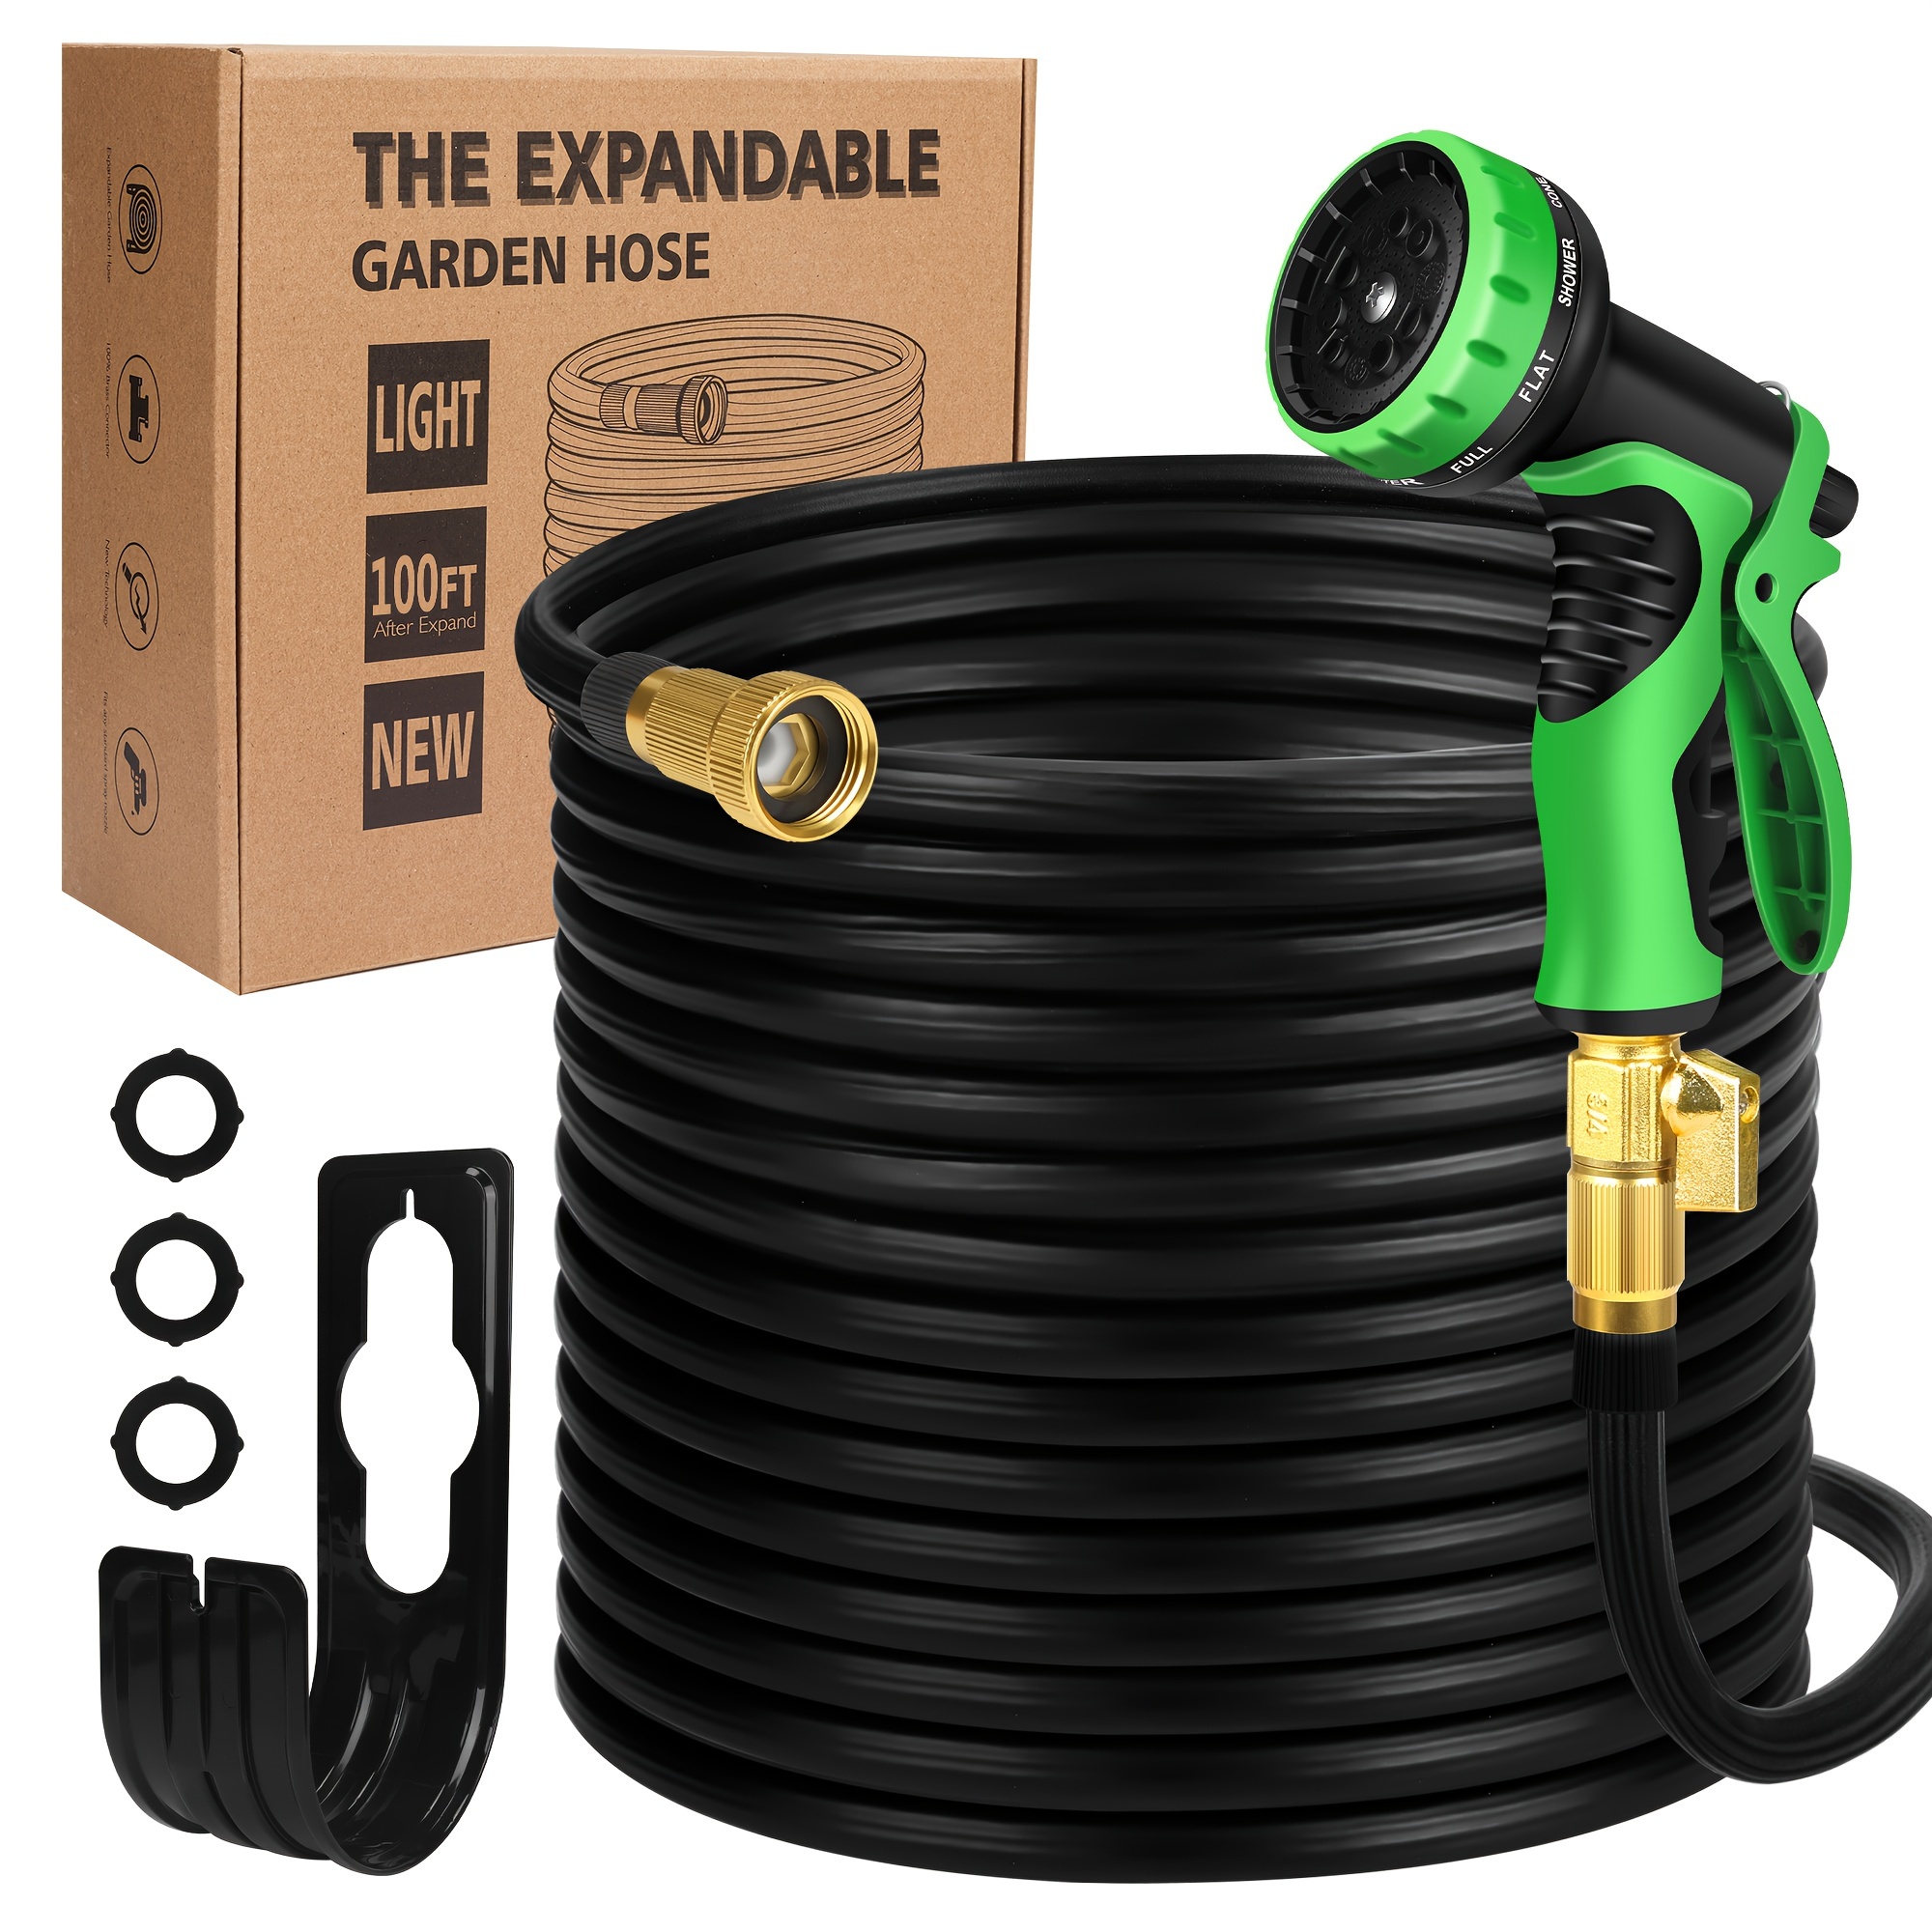 

Expandable Garden Hose 100 Ft Water Hose Flexible Durable 50 Layers Nano Rubber No Kink Lightweight Flex Expanding Long Hoses-3/4'' Solid Brass Fittings-10 Way Nozzle Collapsible Outdoor Pipe